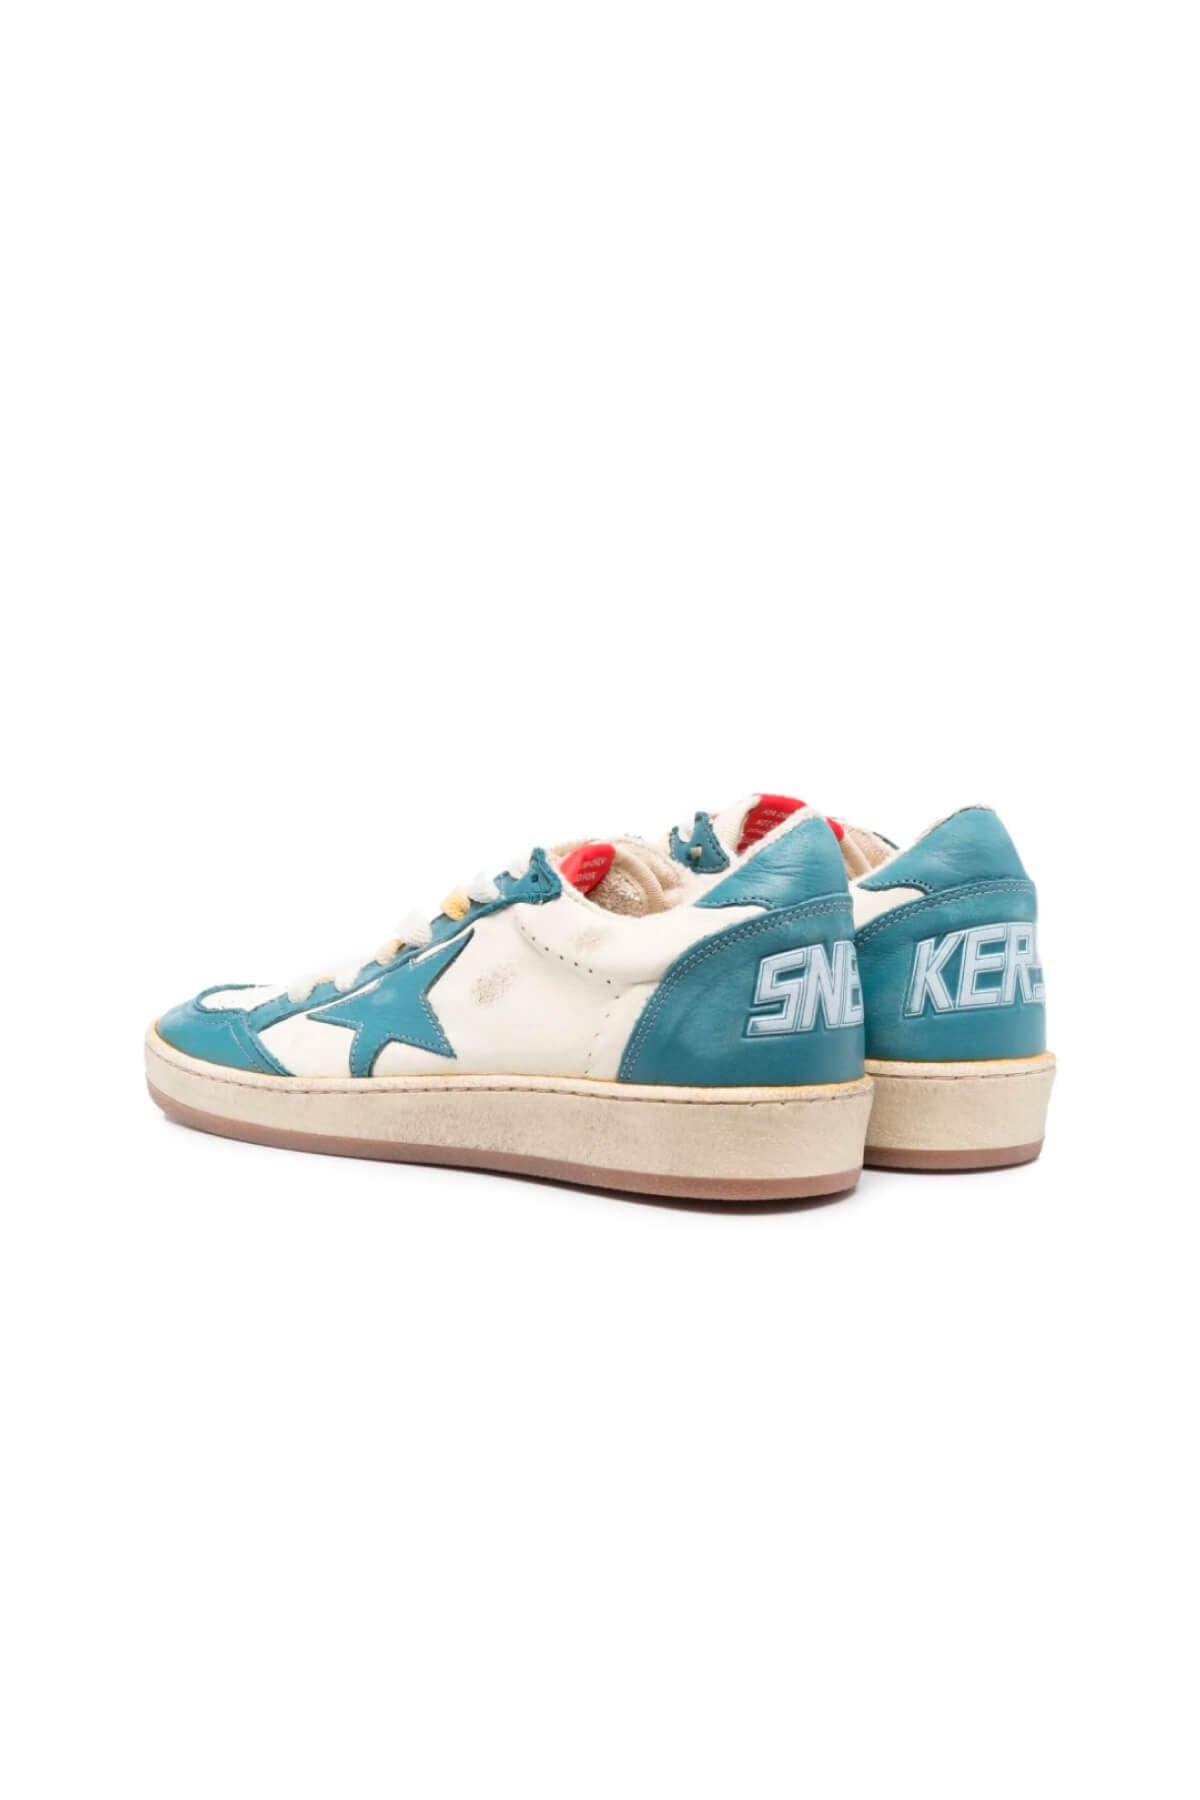 Golden Goose Ball Star Sneakers - Petroleum/ Dirty White